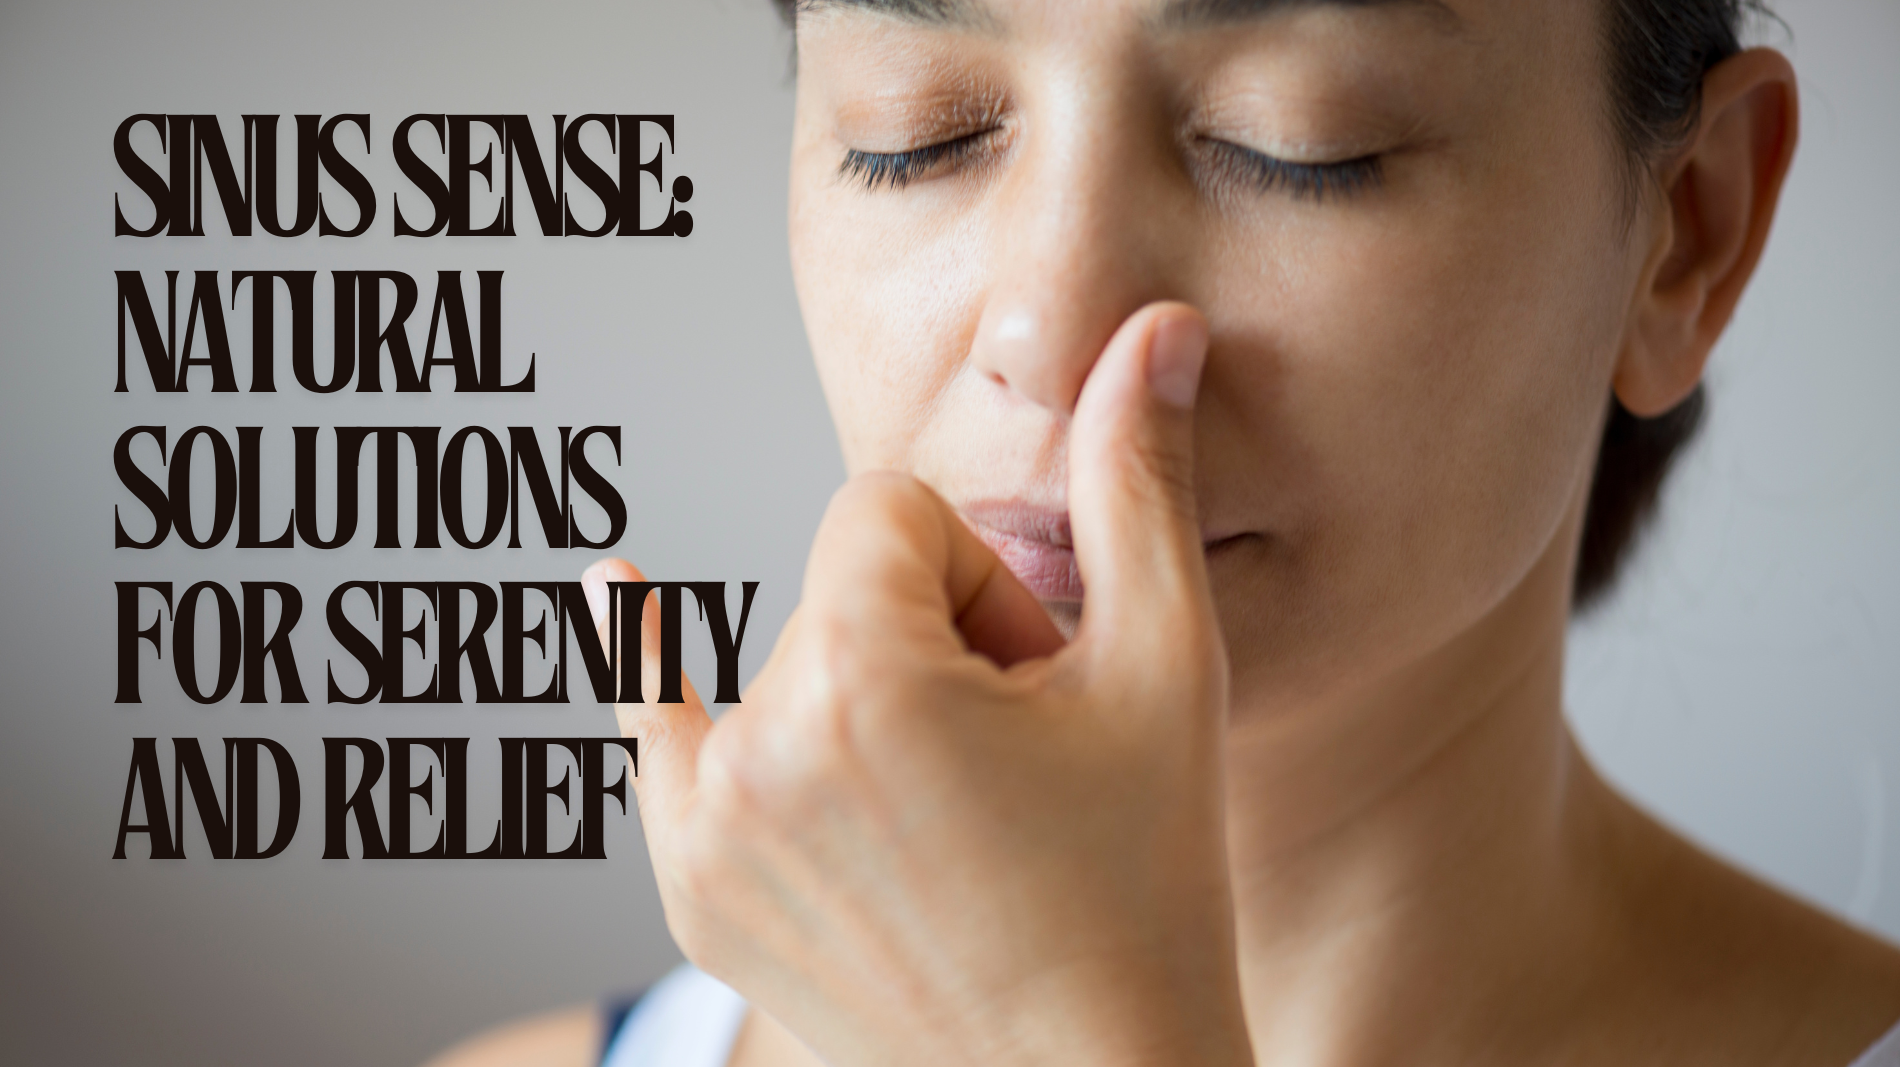 Sinus Sense: Natural Solutions for Serenity and Relief